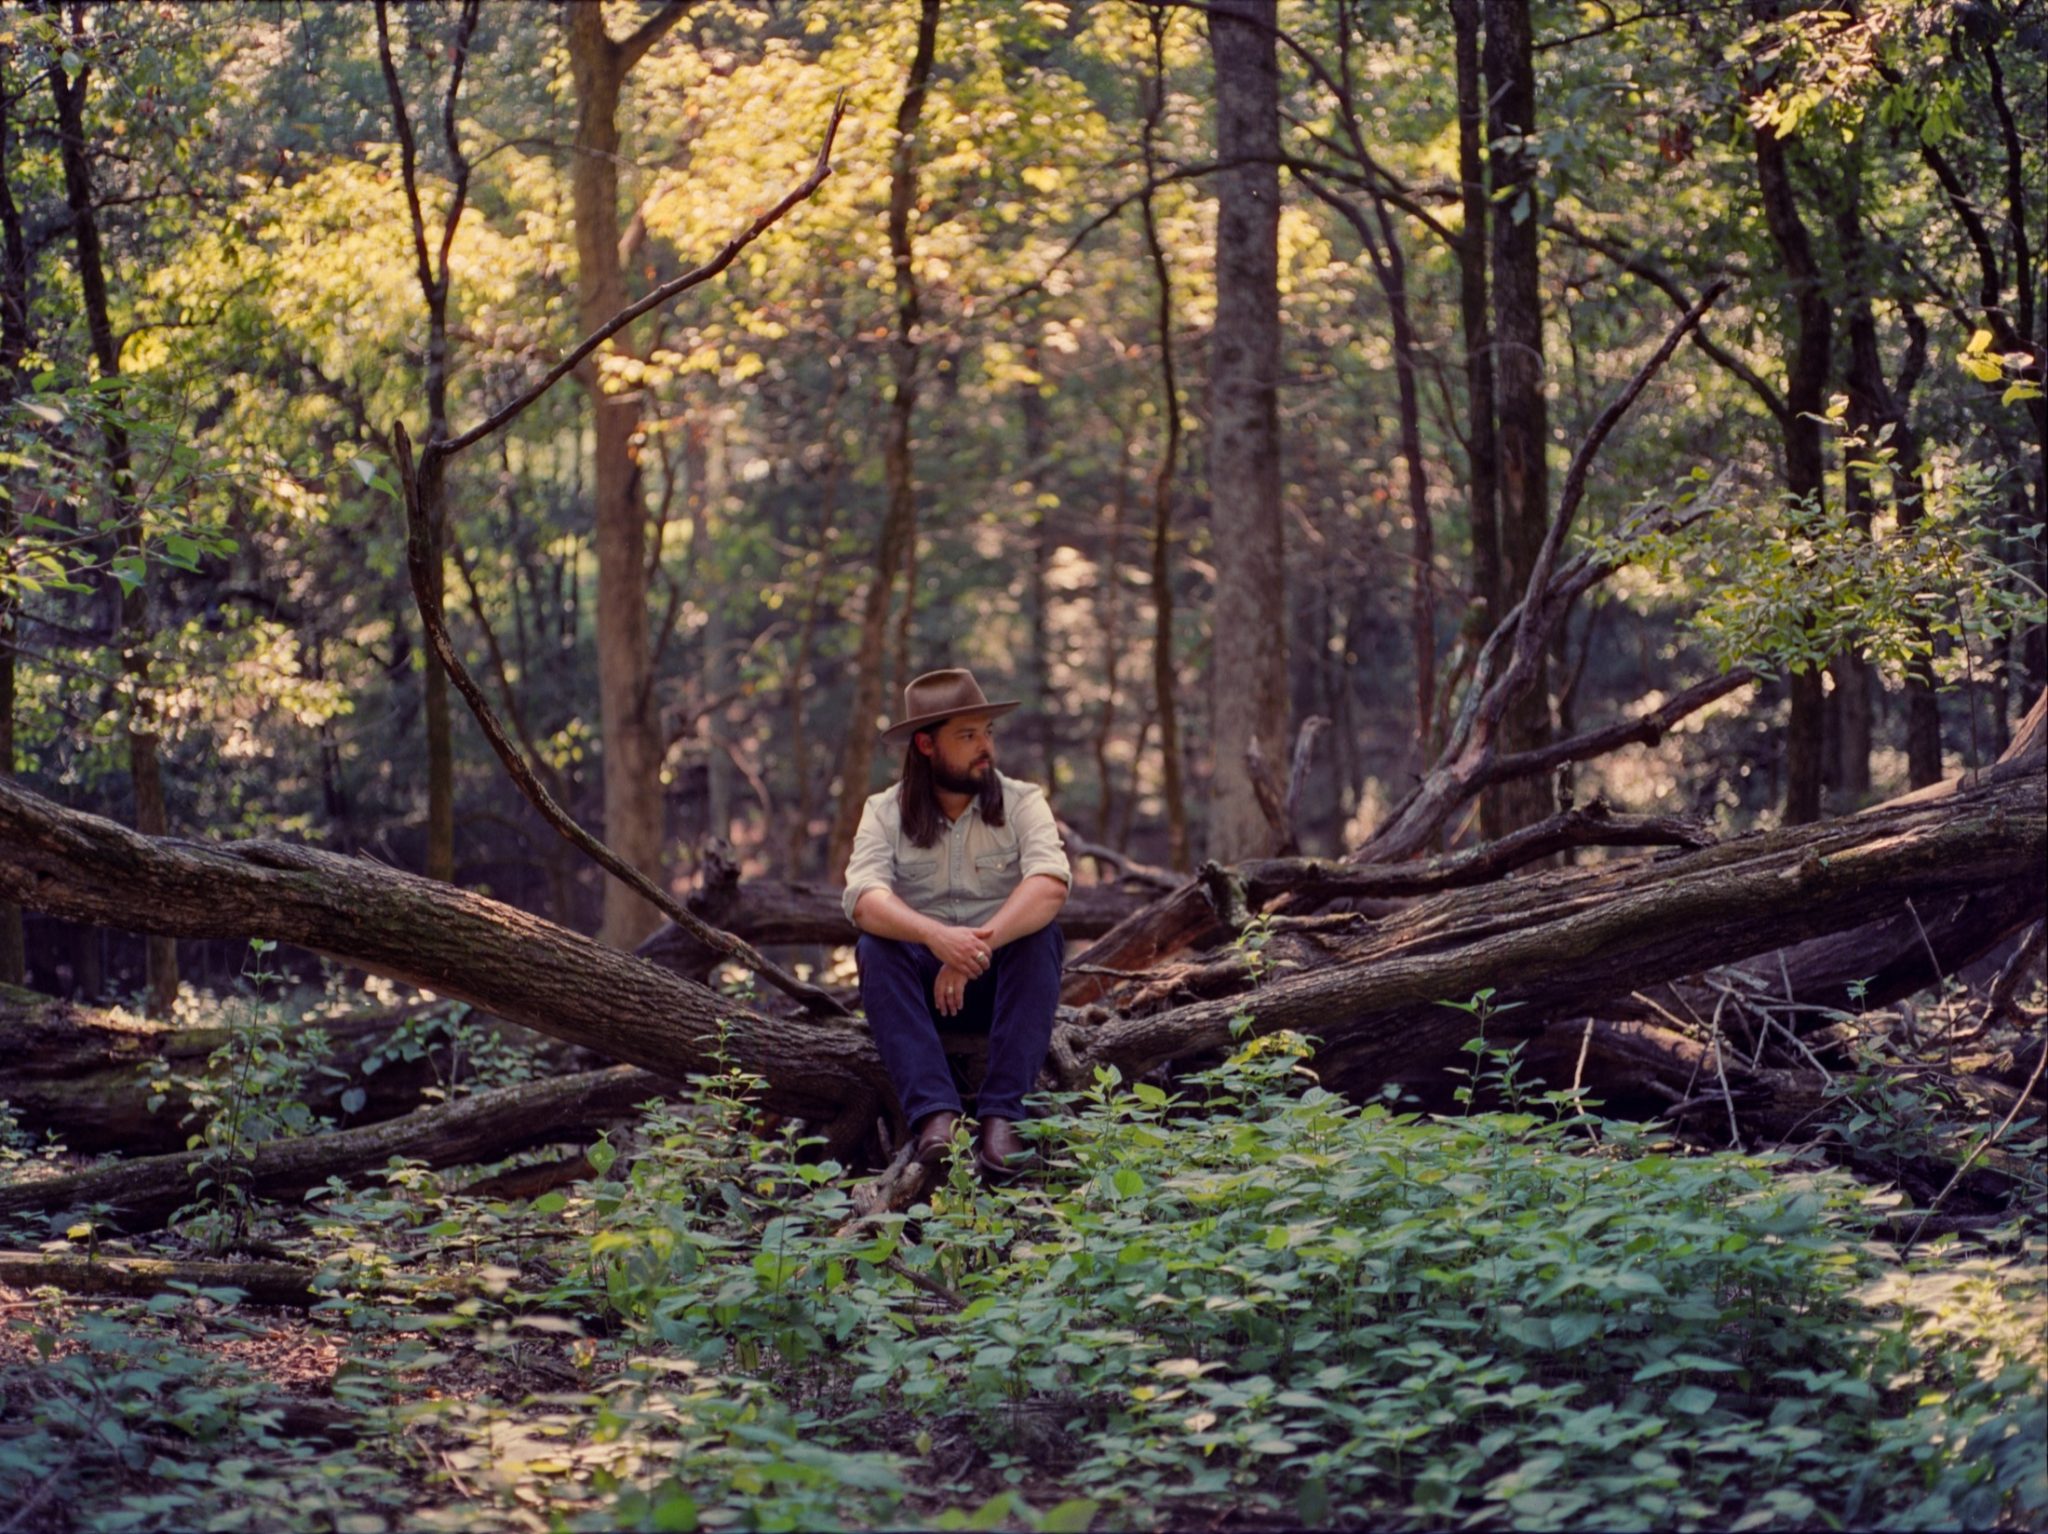 Caleb Caudle sits on a log in a forest